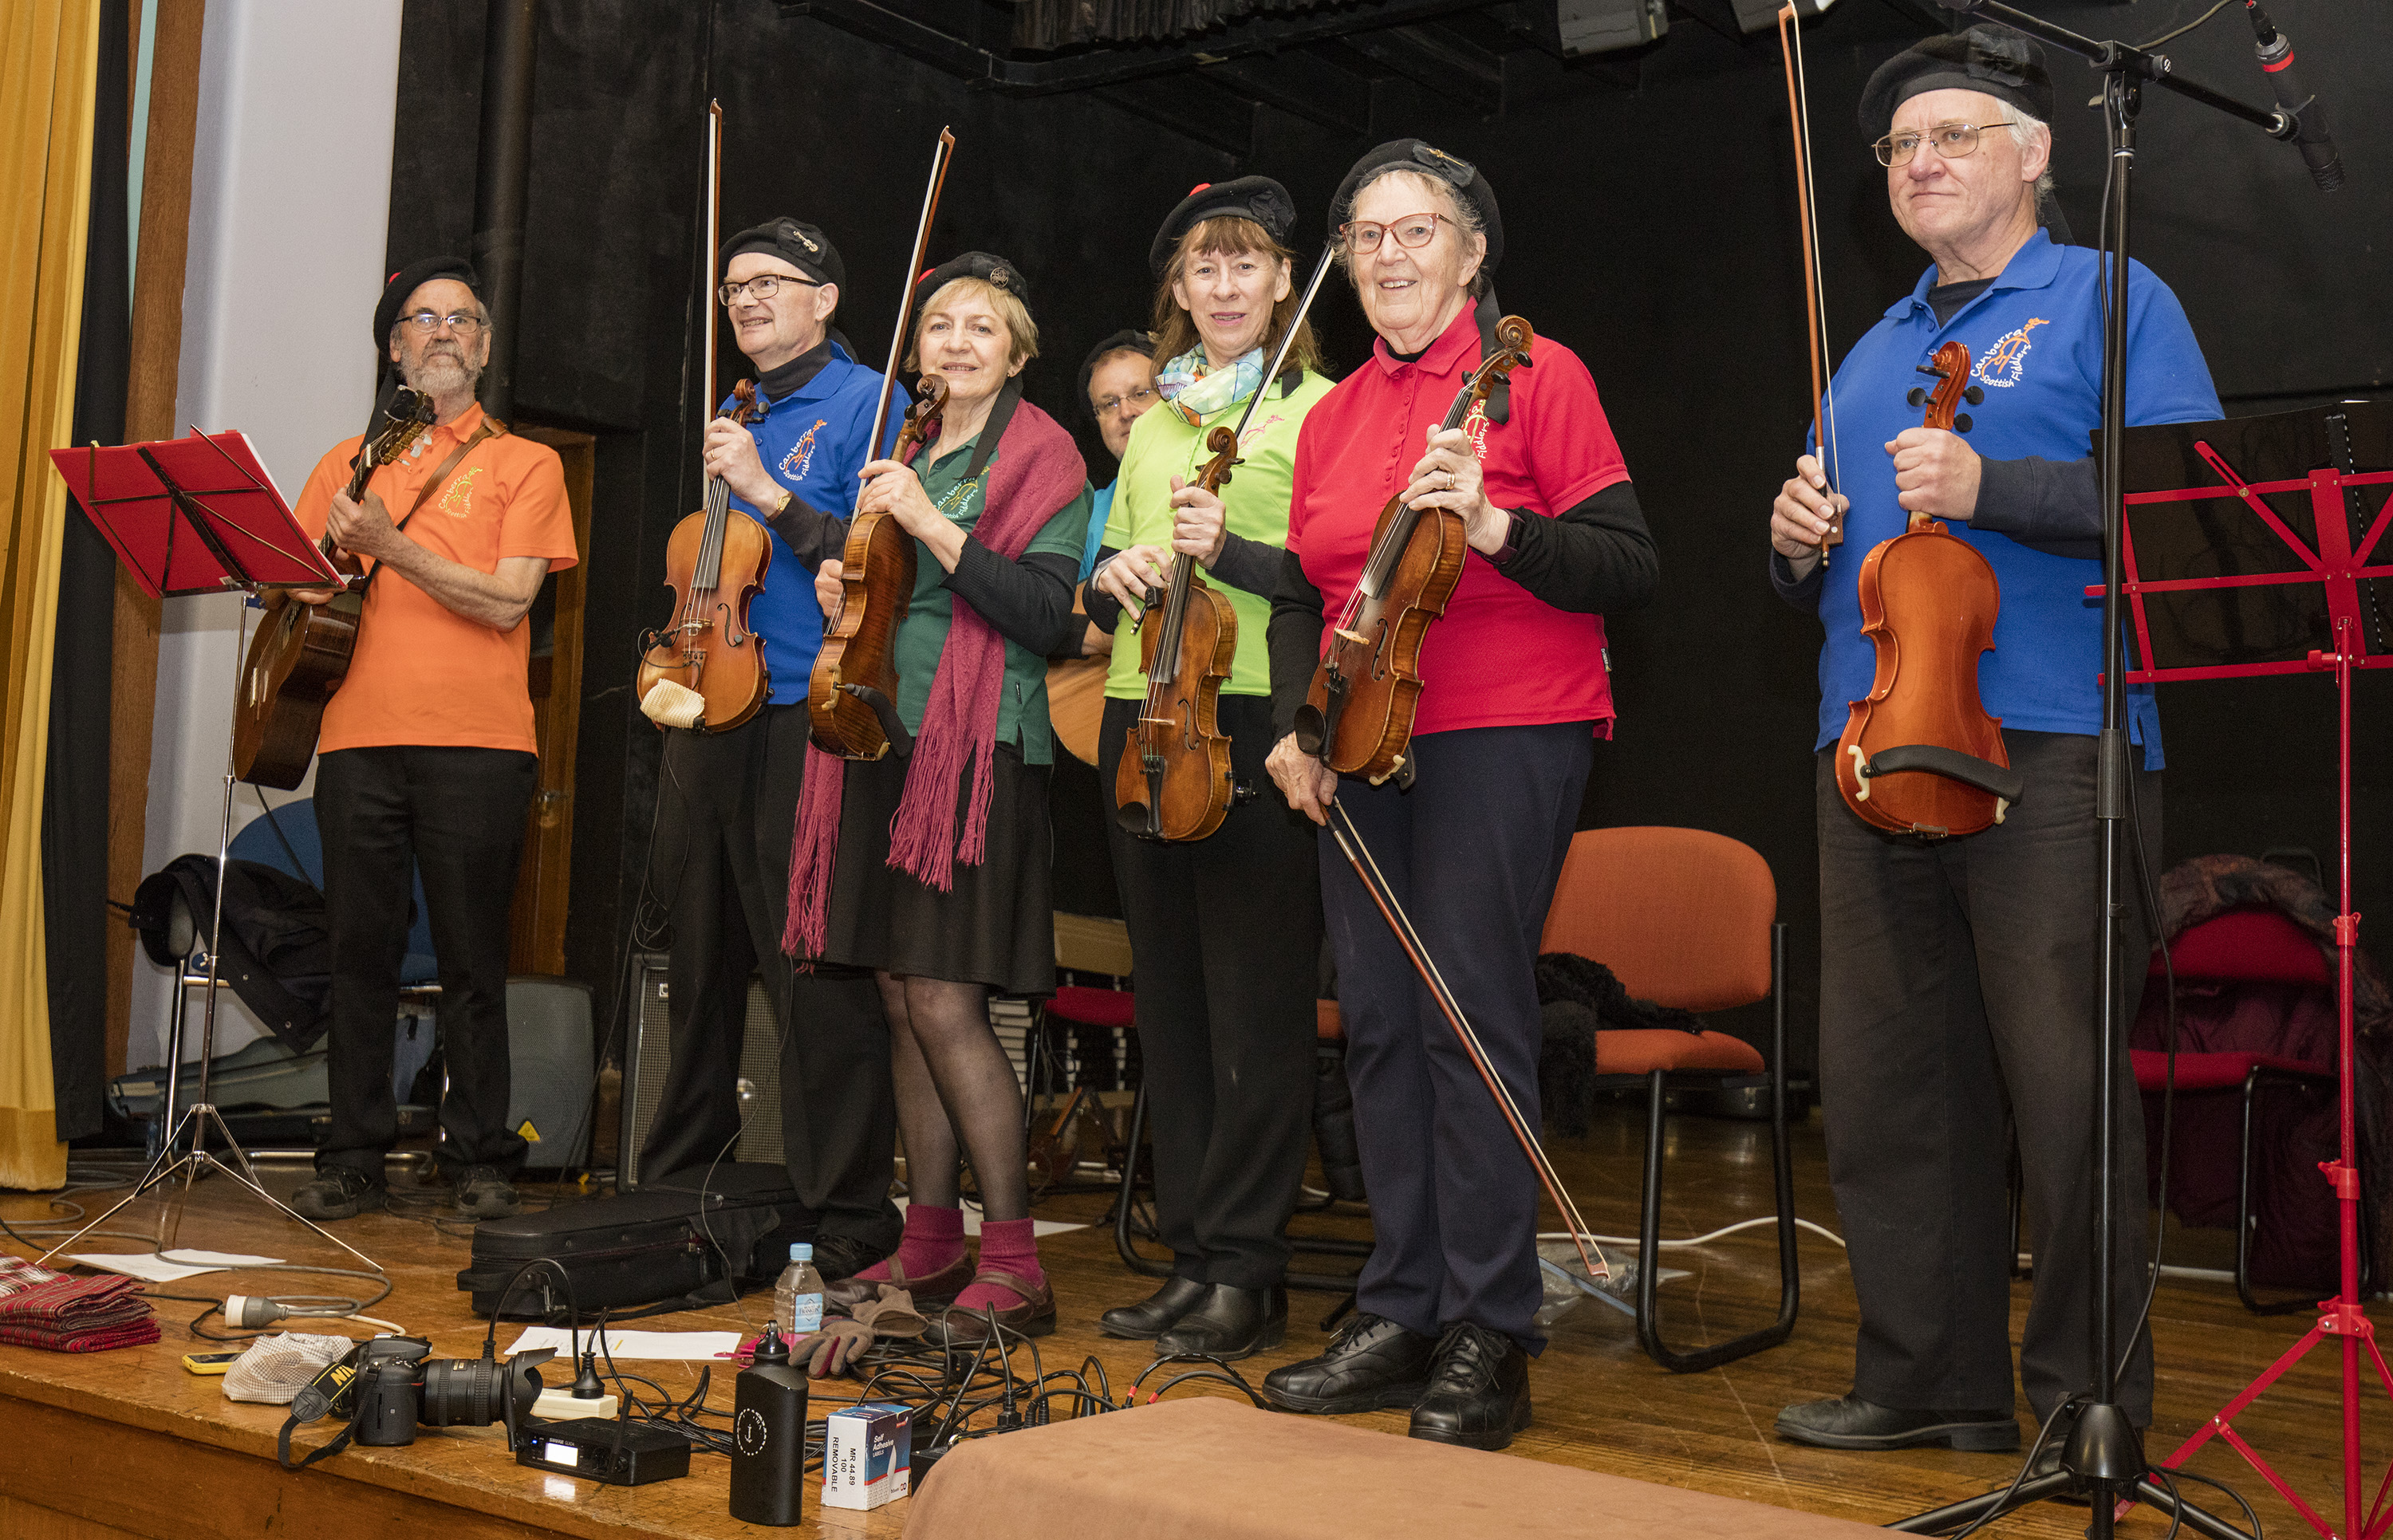 Canberra Scottish Fiddlers at the Scottish Country Dance at the Wesley Centre July 2021